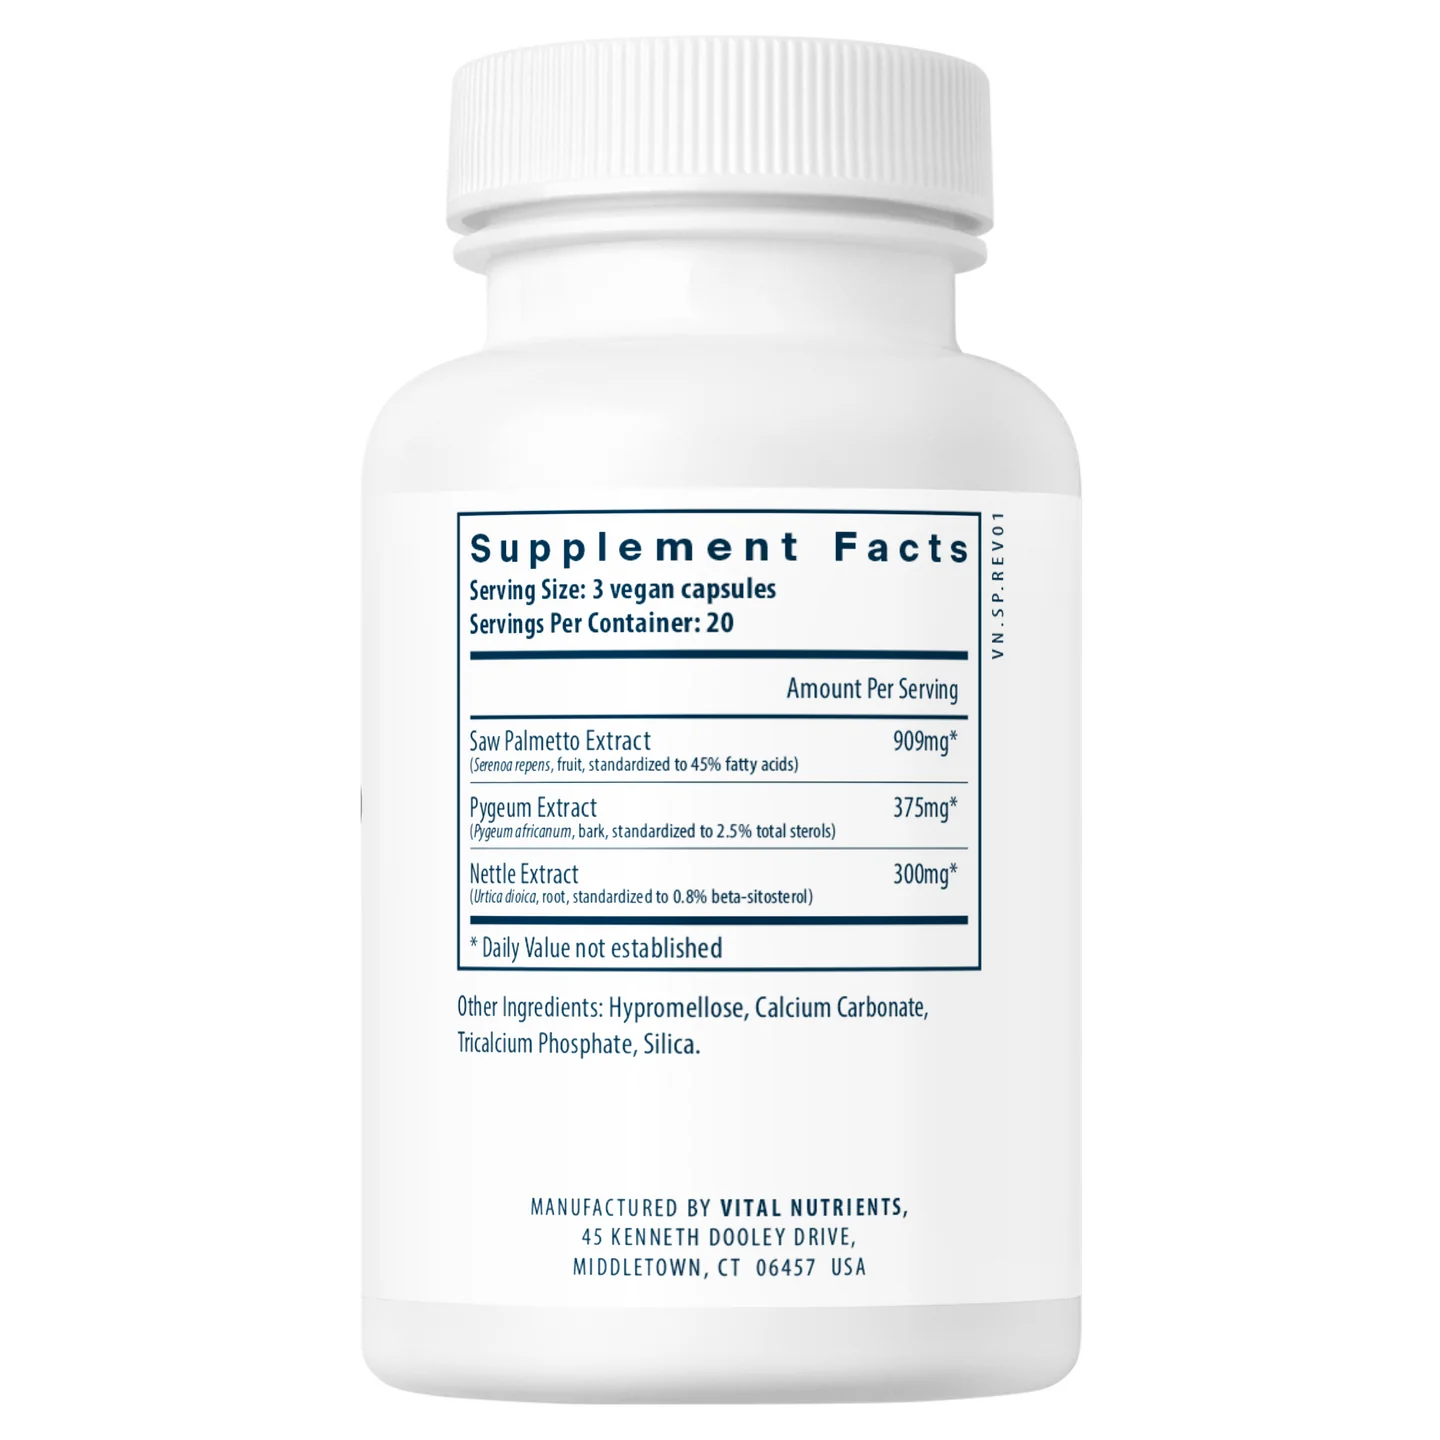 Vital Nutrients Saw Palmetto Pygeum Nettle Root Capsules